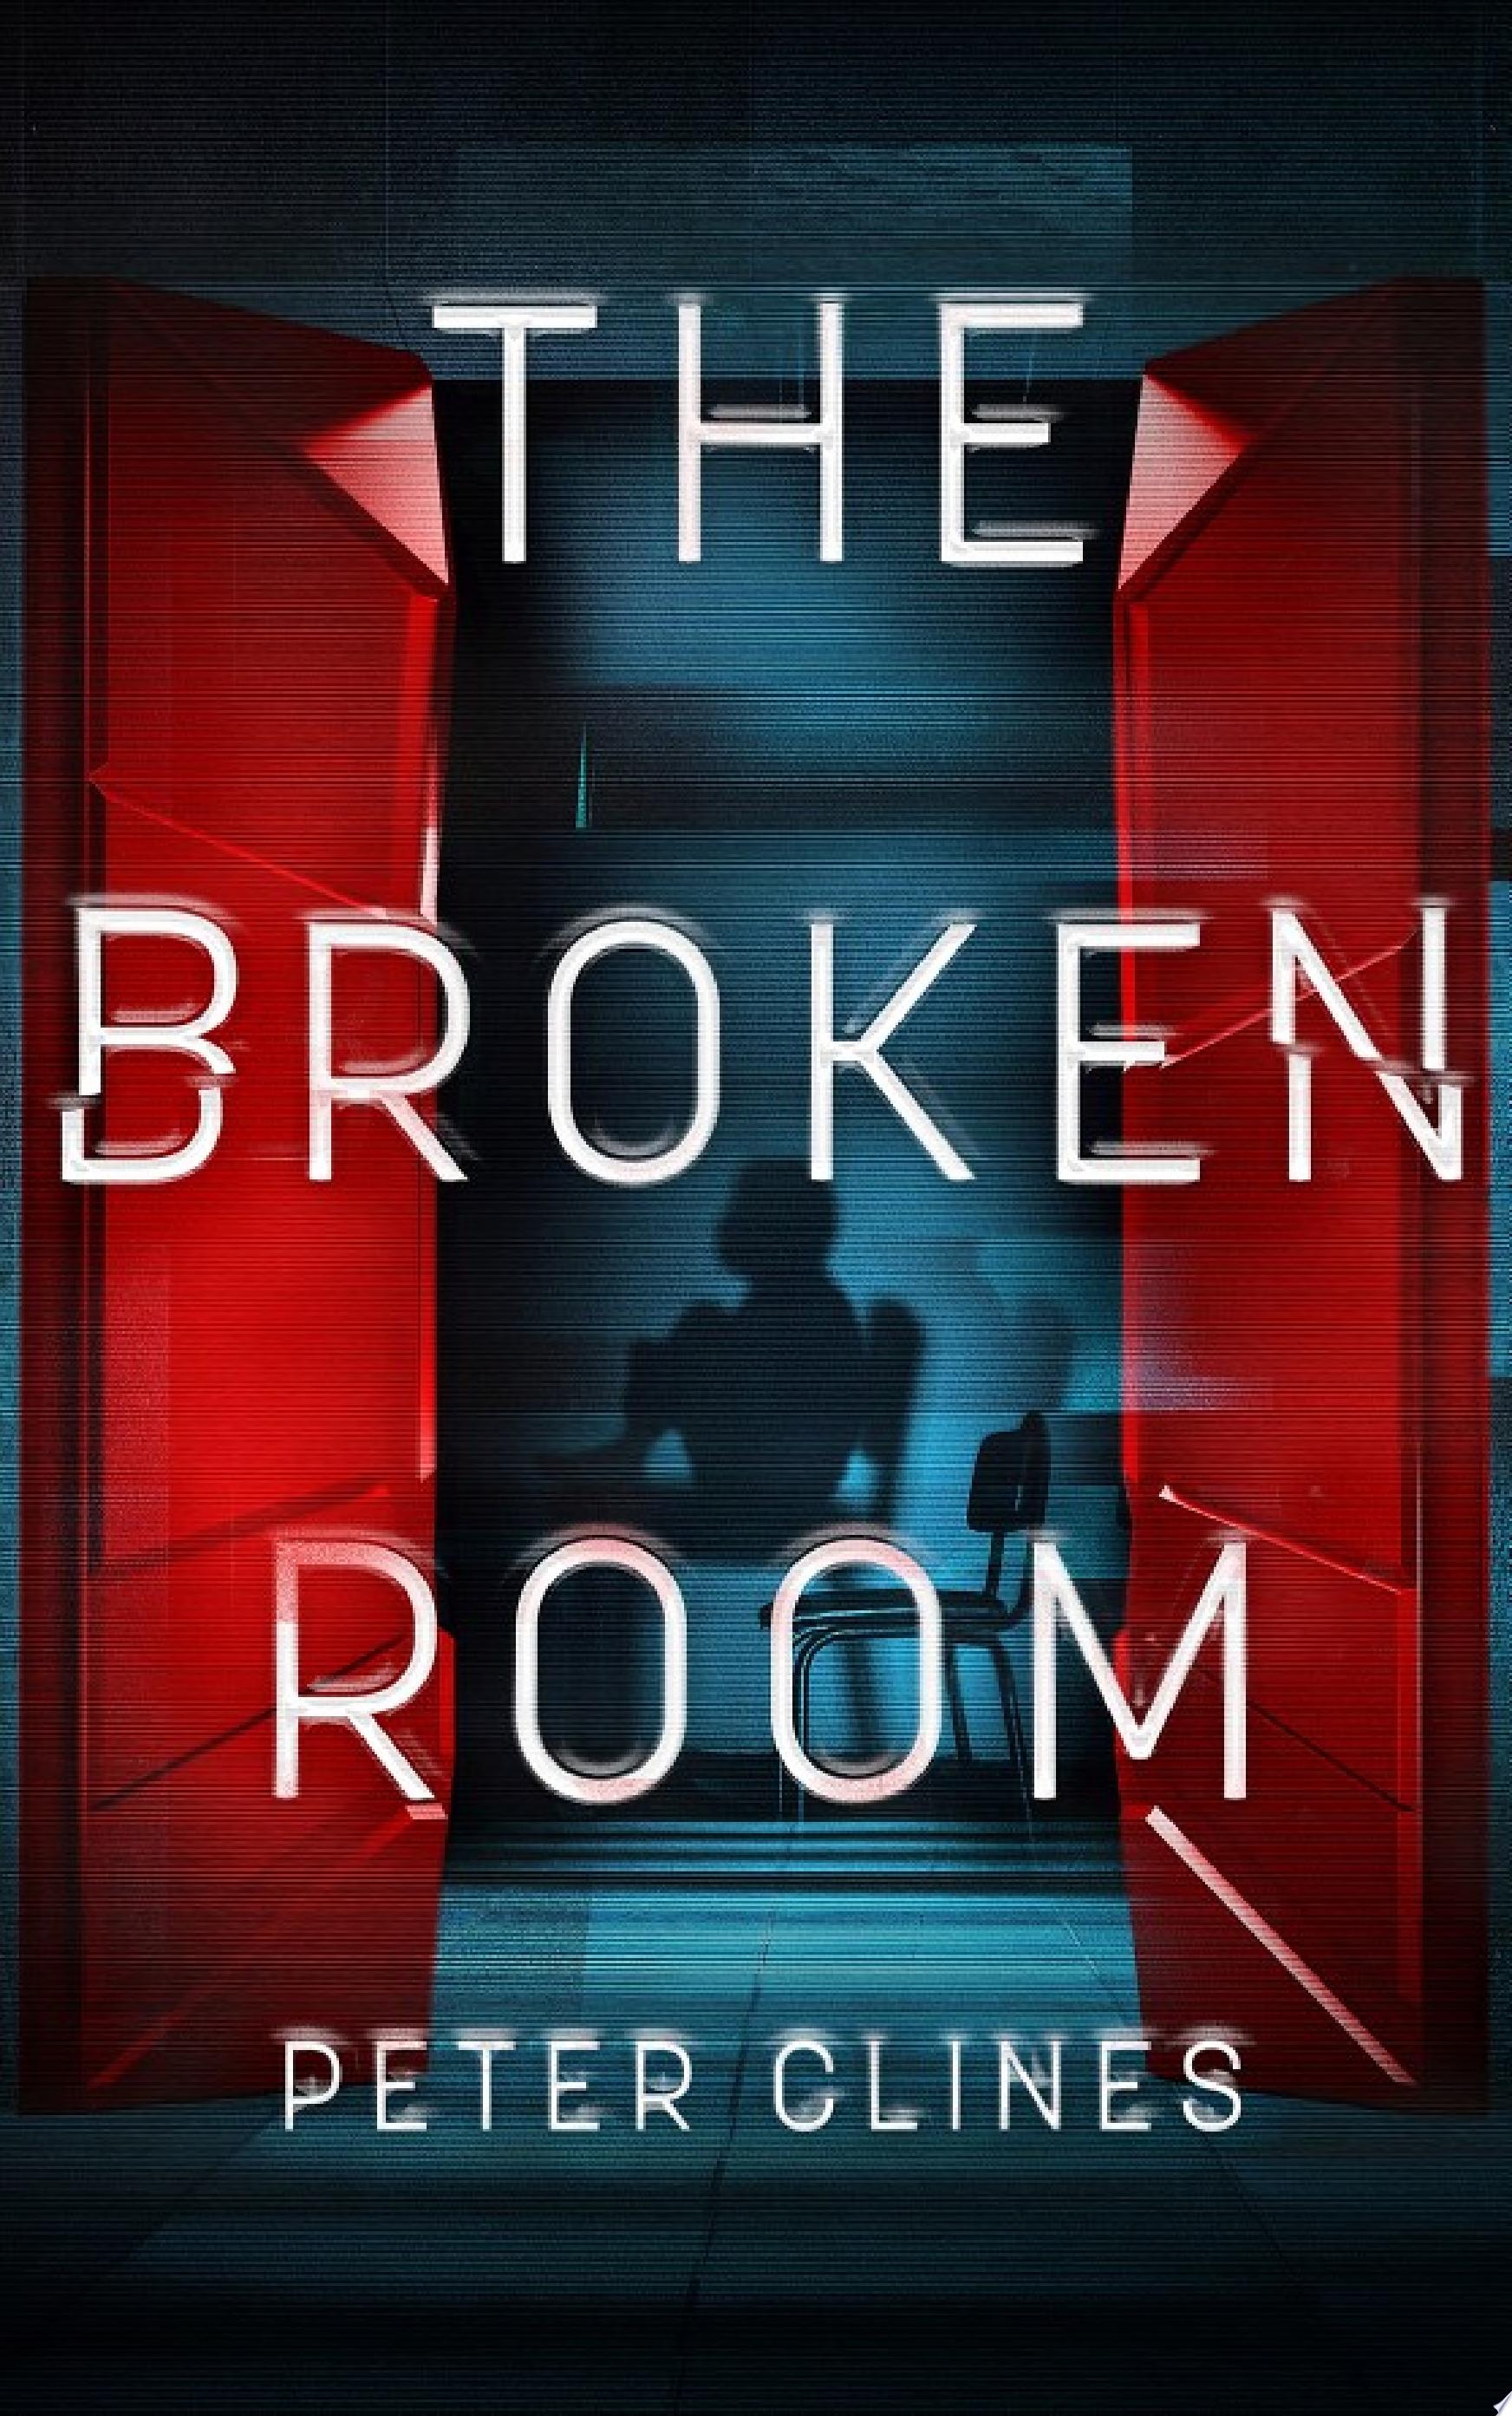 Image for "The Broken Room"